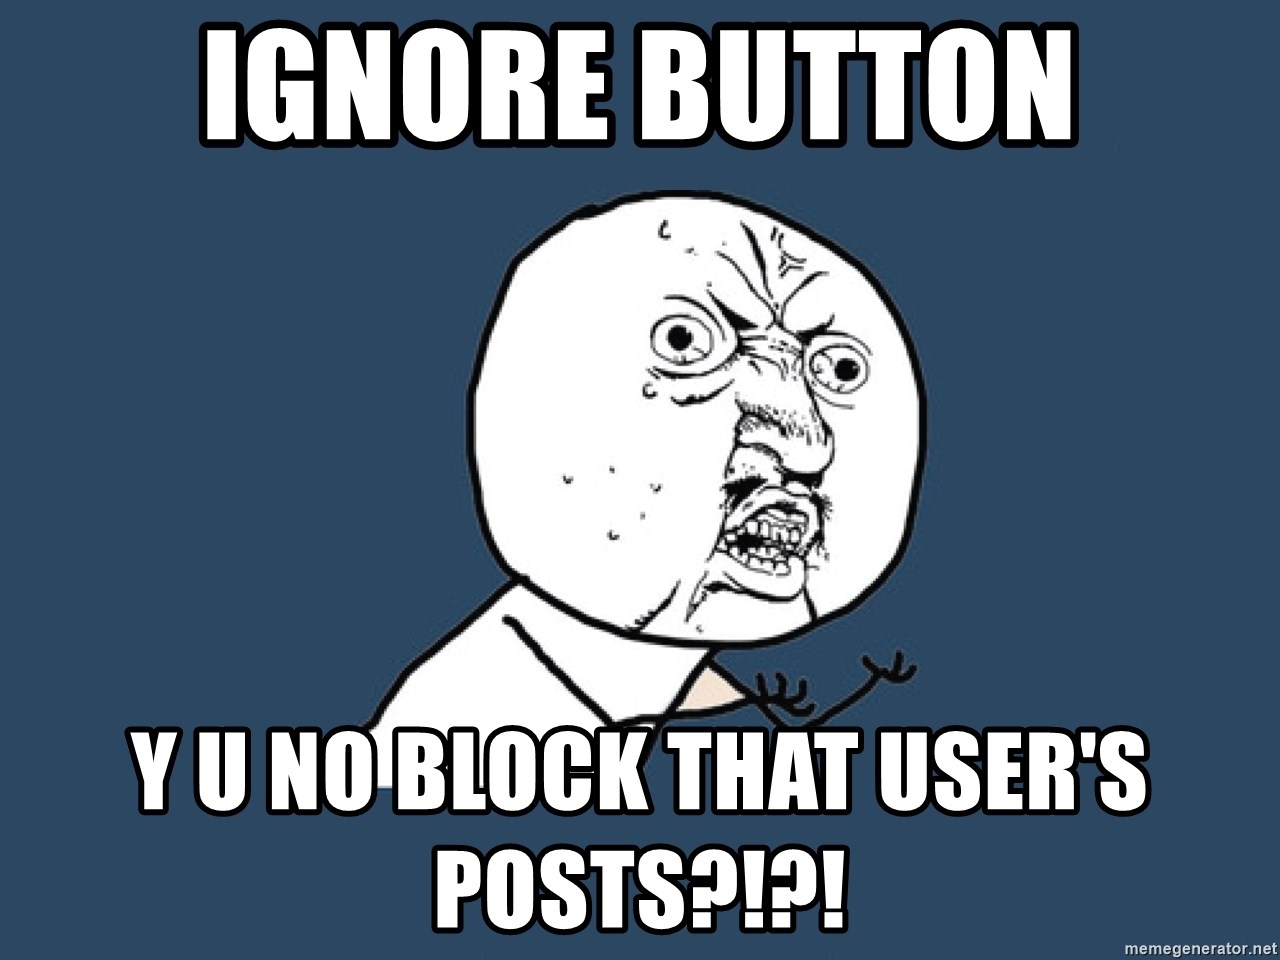 ignore-button-y-u-no-block-that-users-posts.jpg